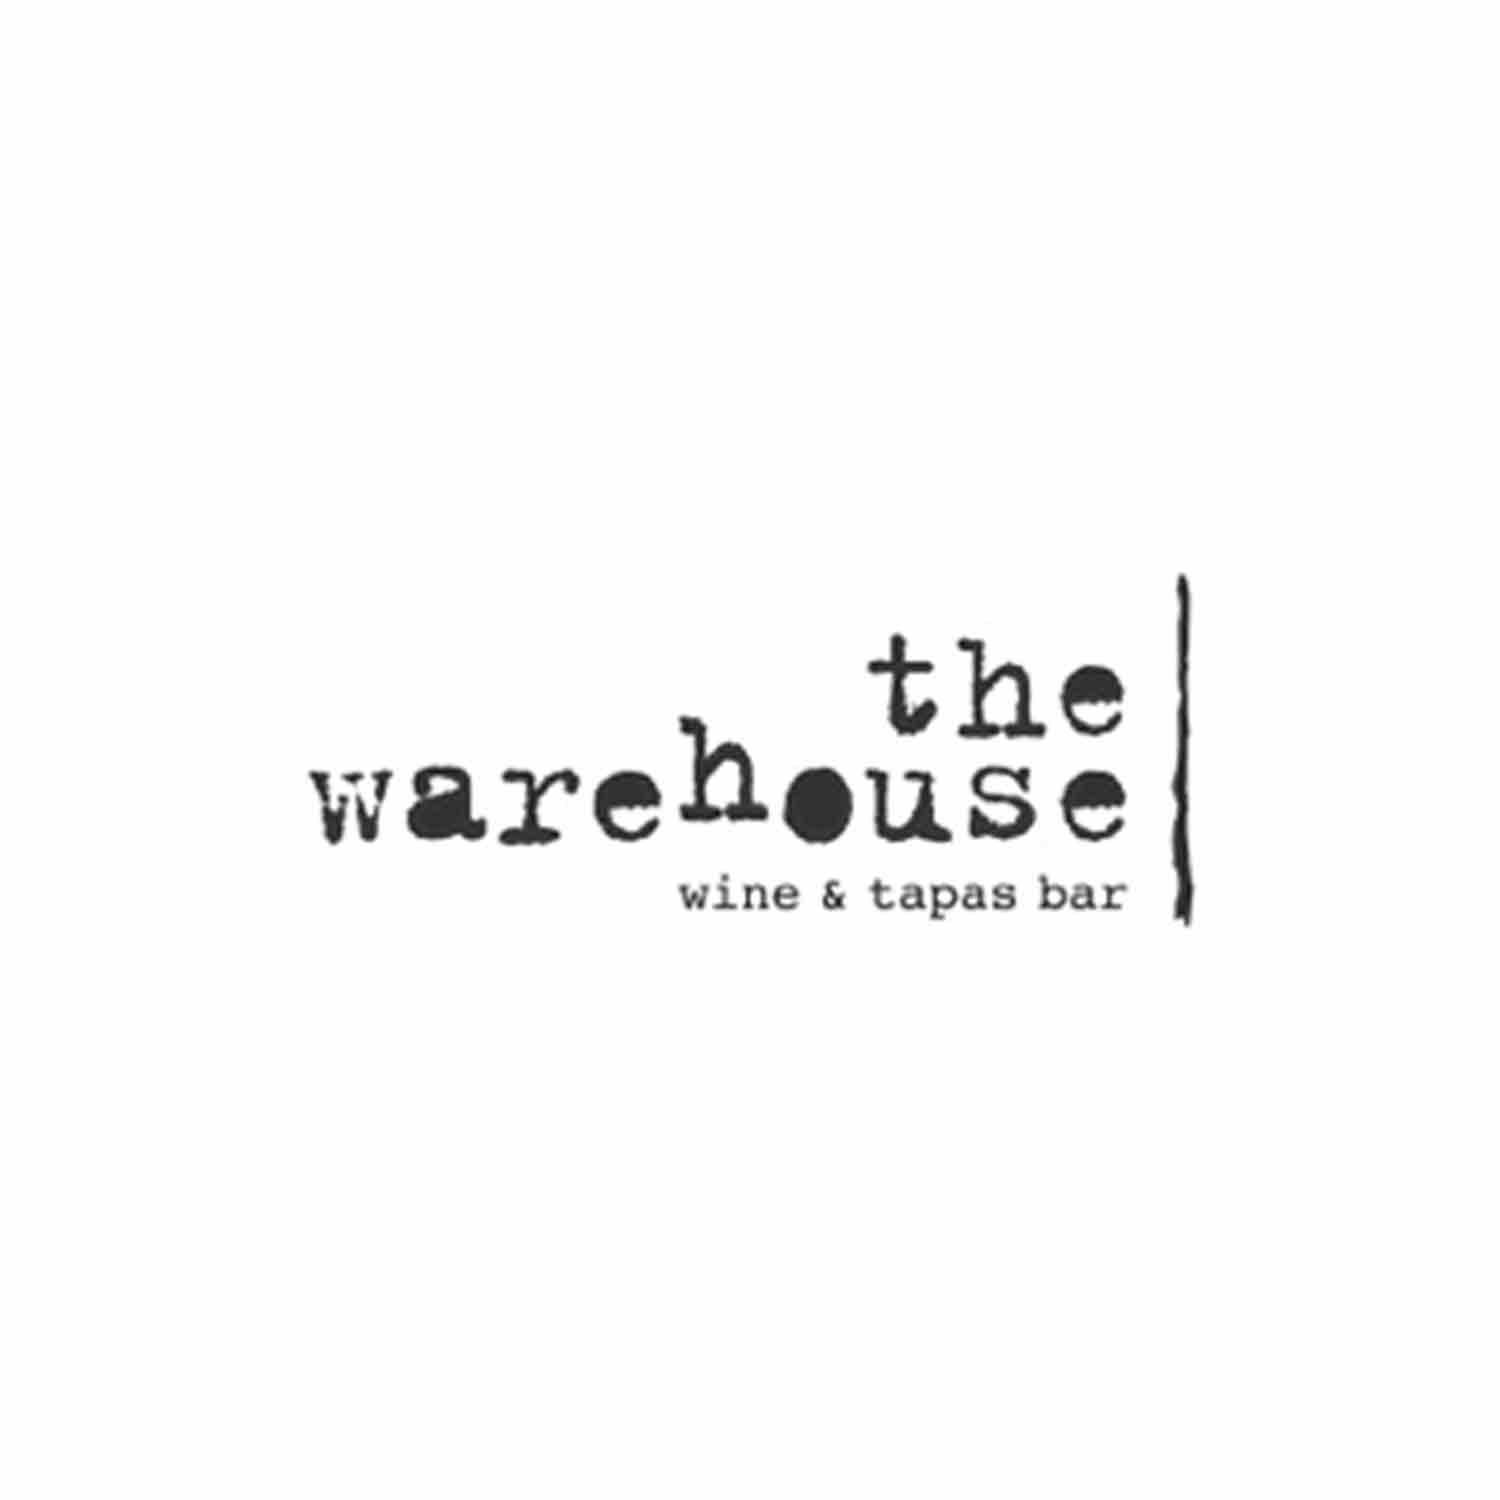 The Warehouse 